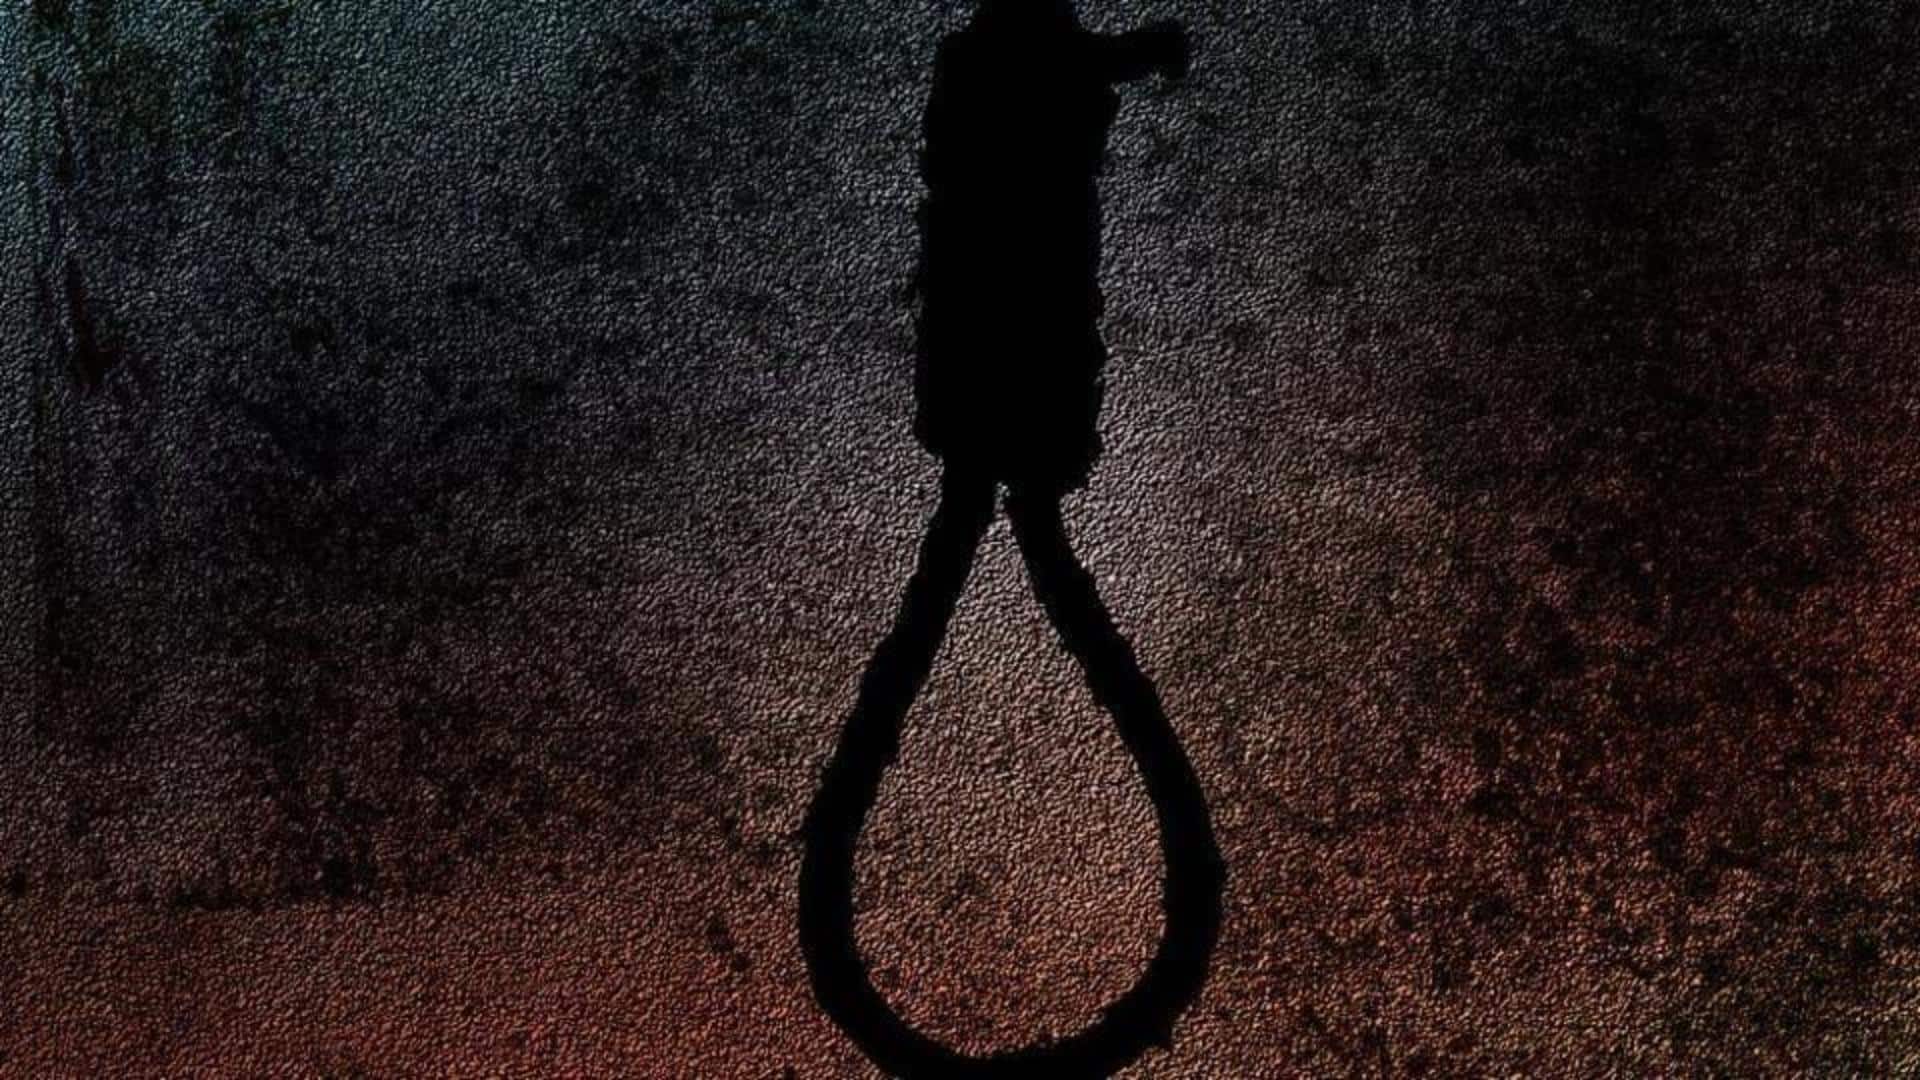 IIT Madras student found dead, 4th suspected suicide this year